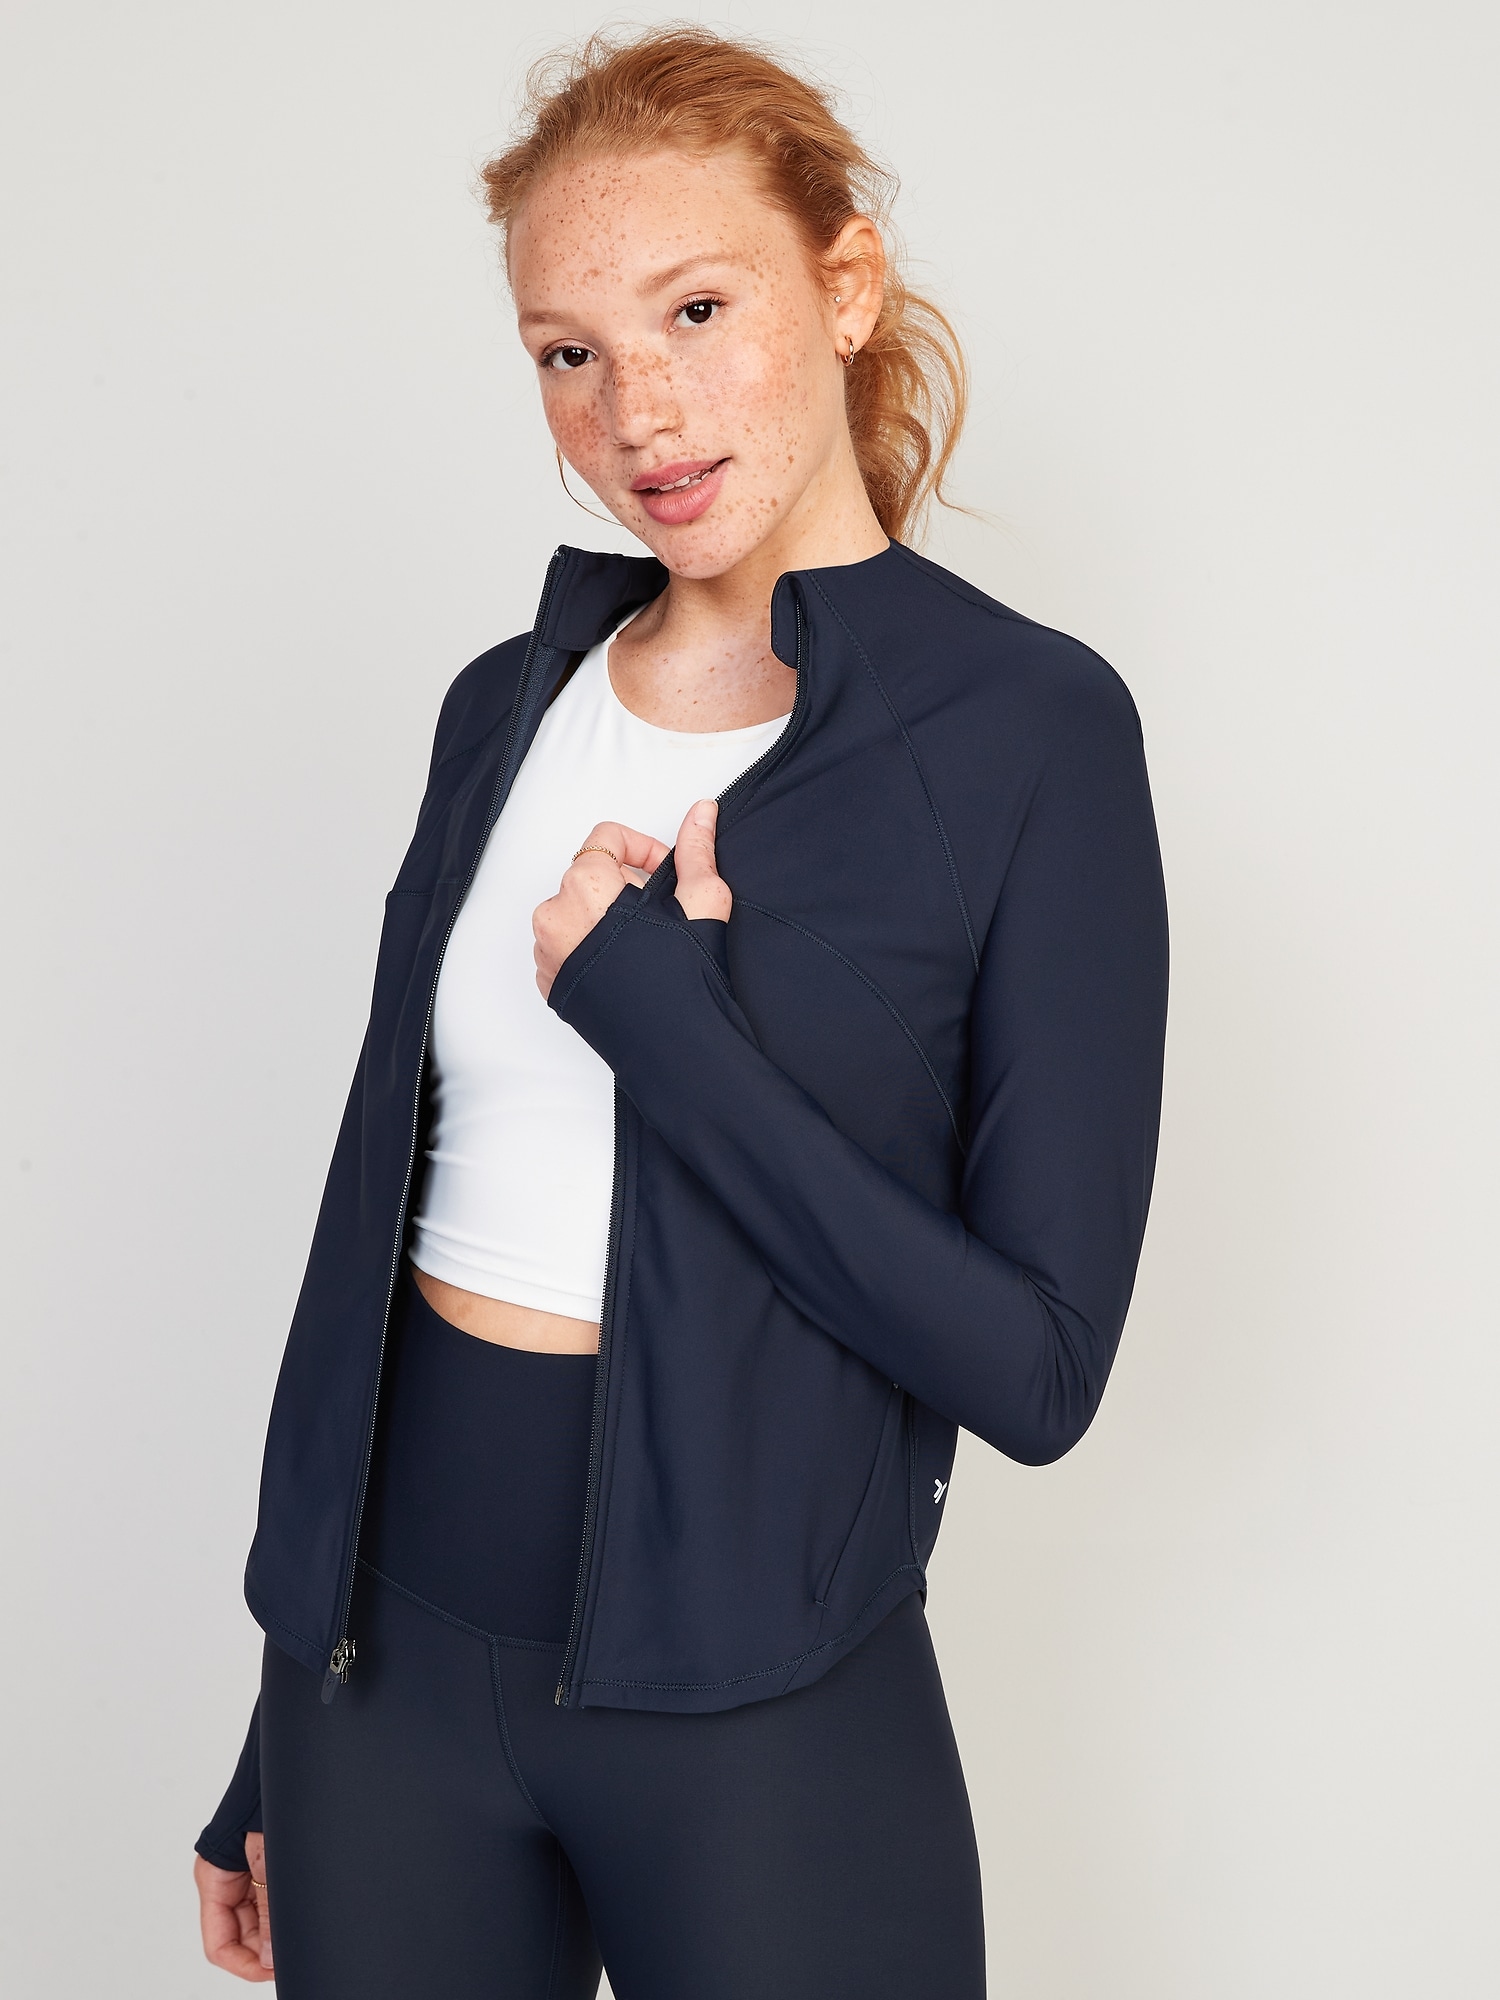 PowerSoft Cropped Full-Zip Performance Jacket for Women